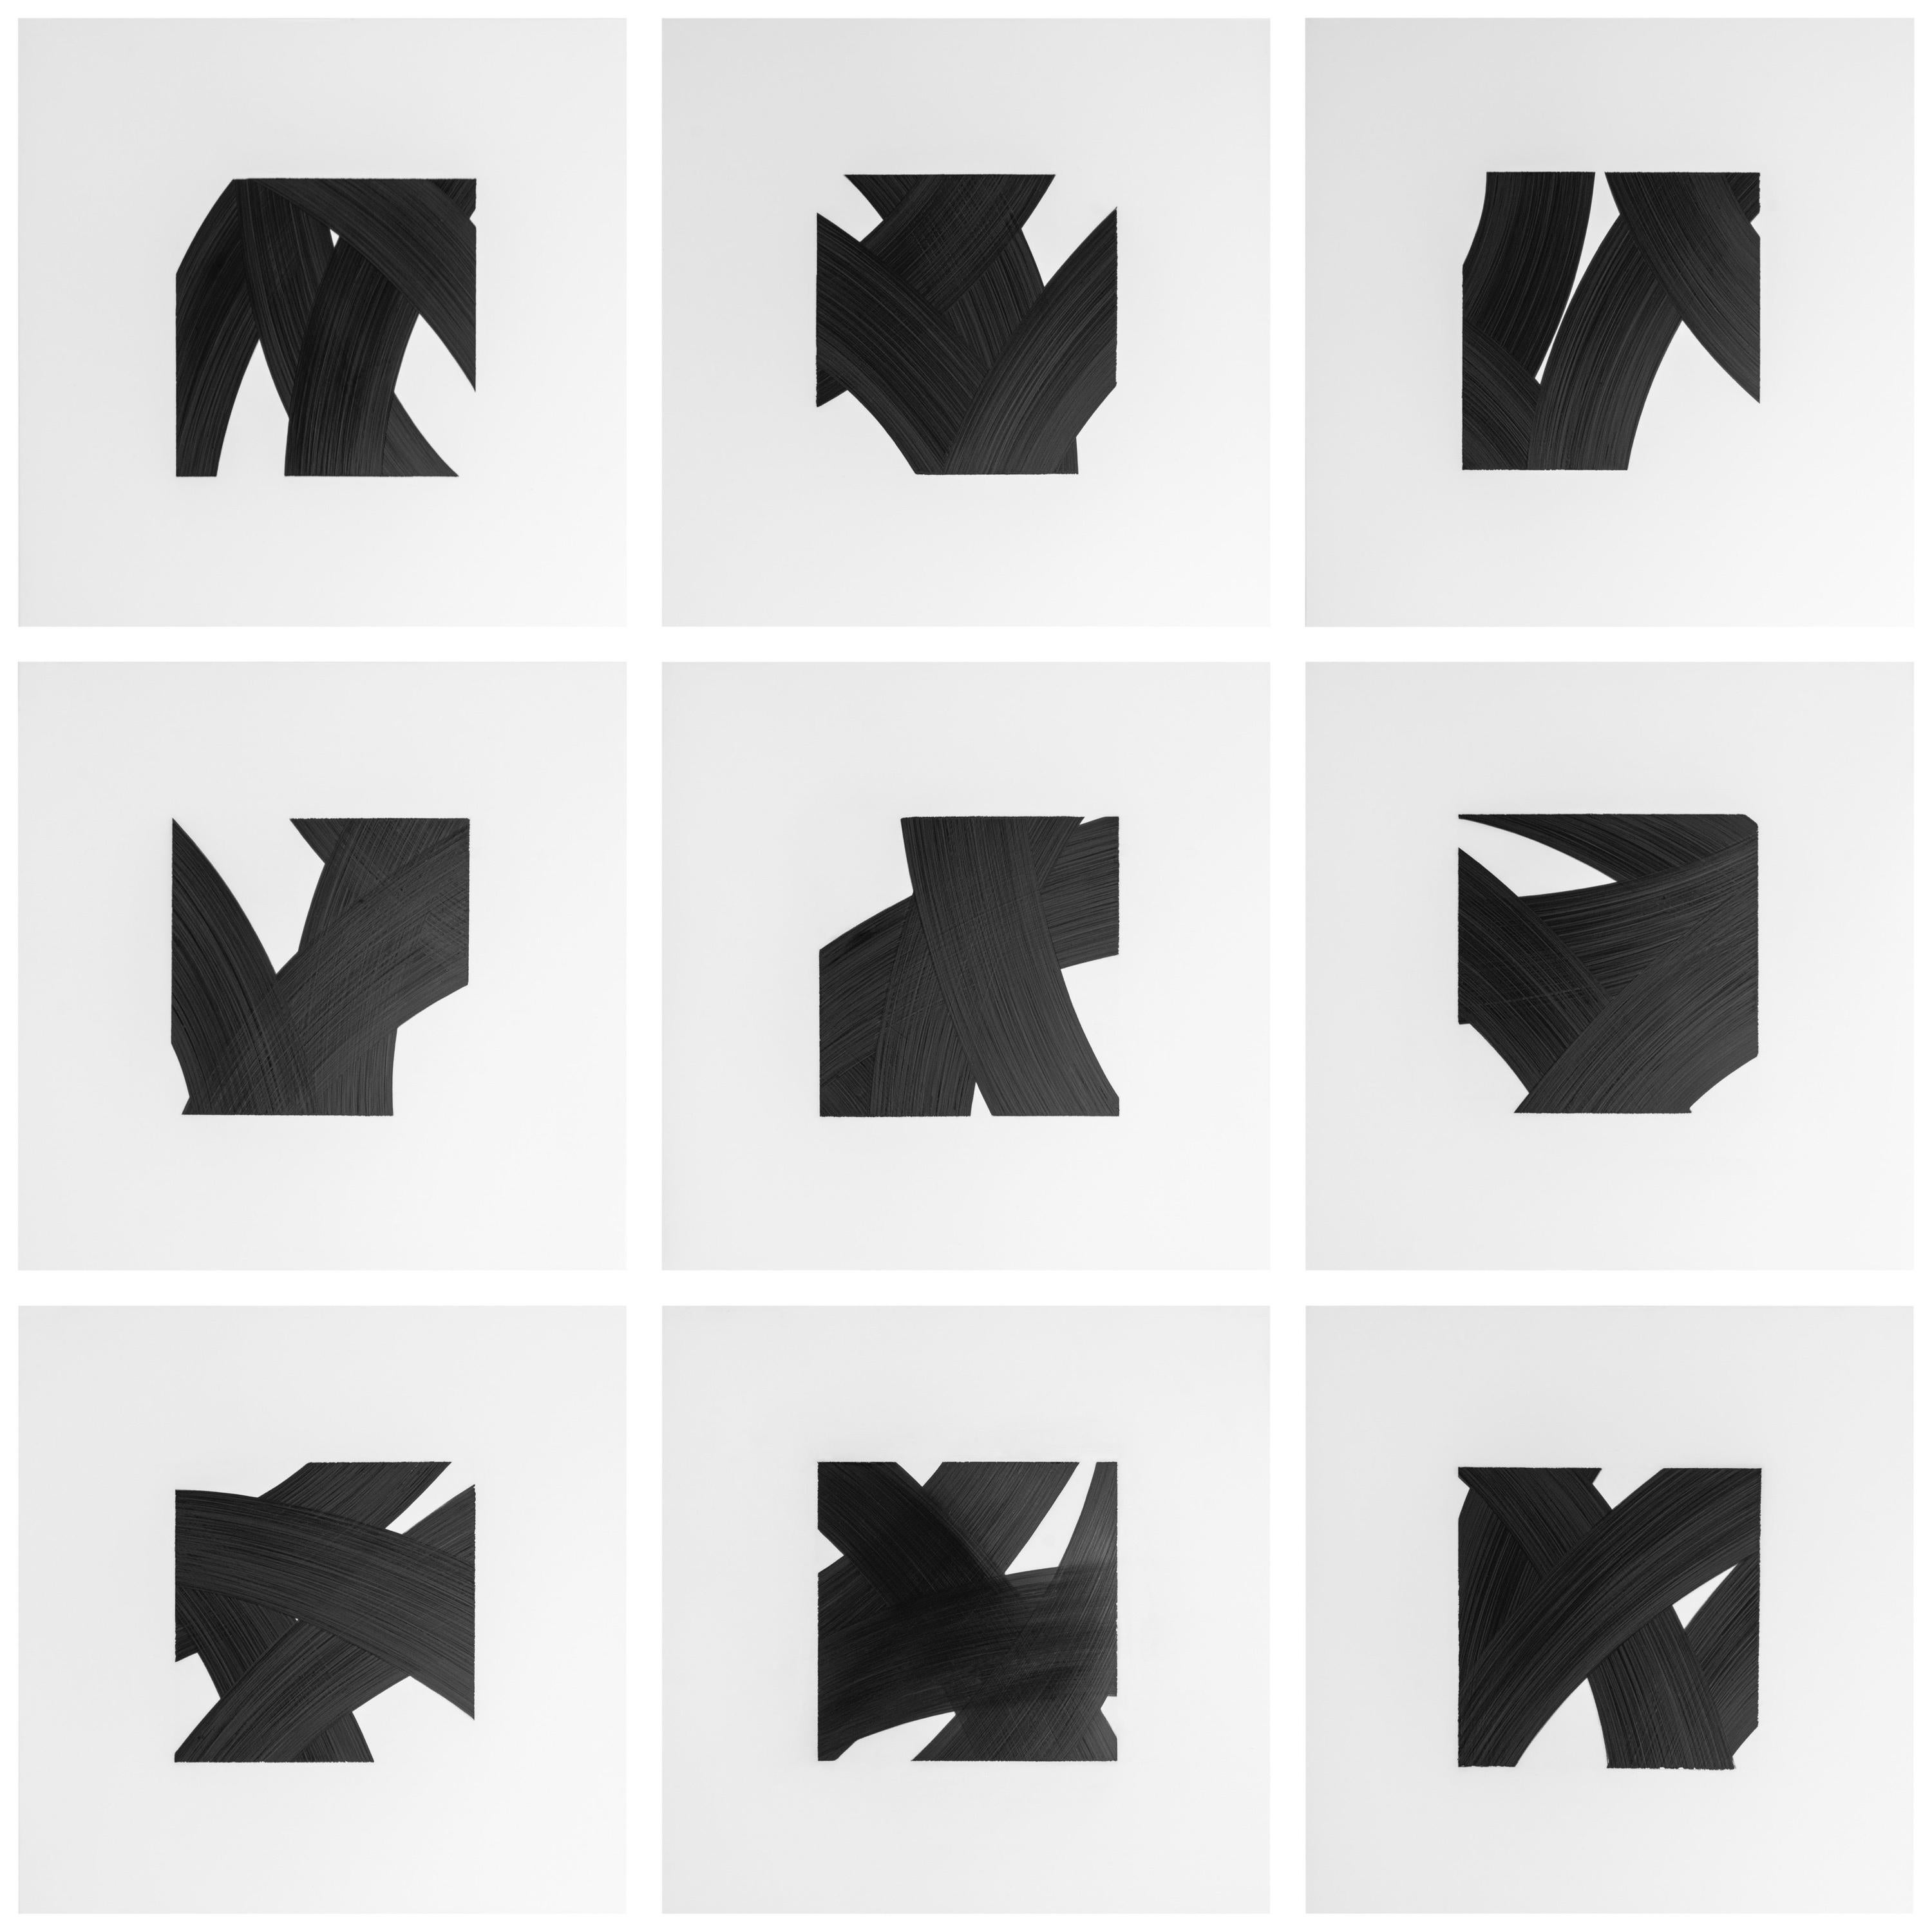 Patrick Carrara Black Ink on Mylar Drawings, Appearance Series, 2016 - 2017 For Sale